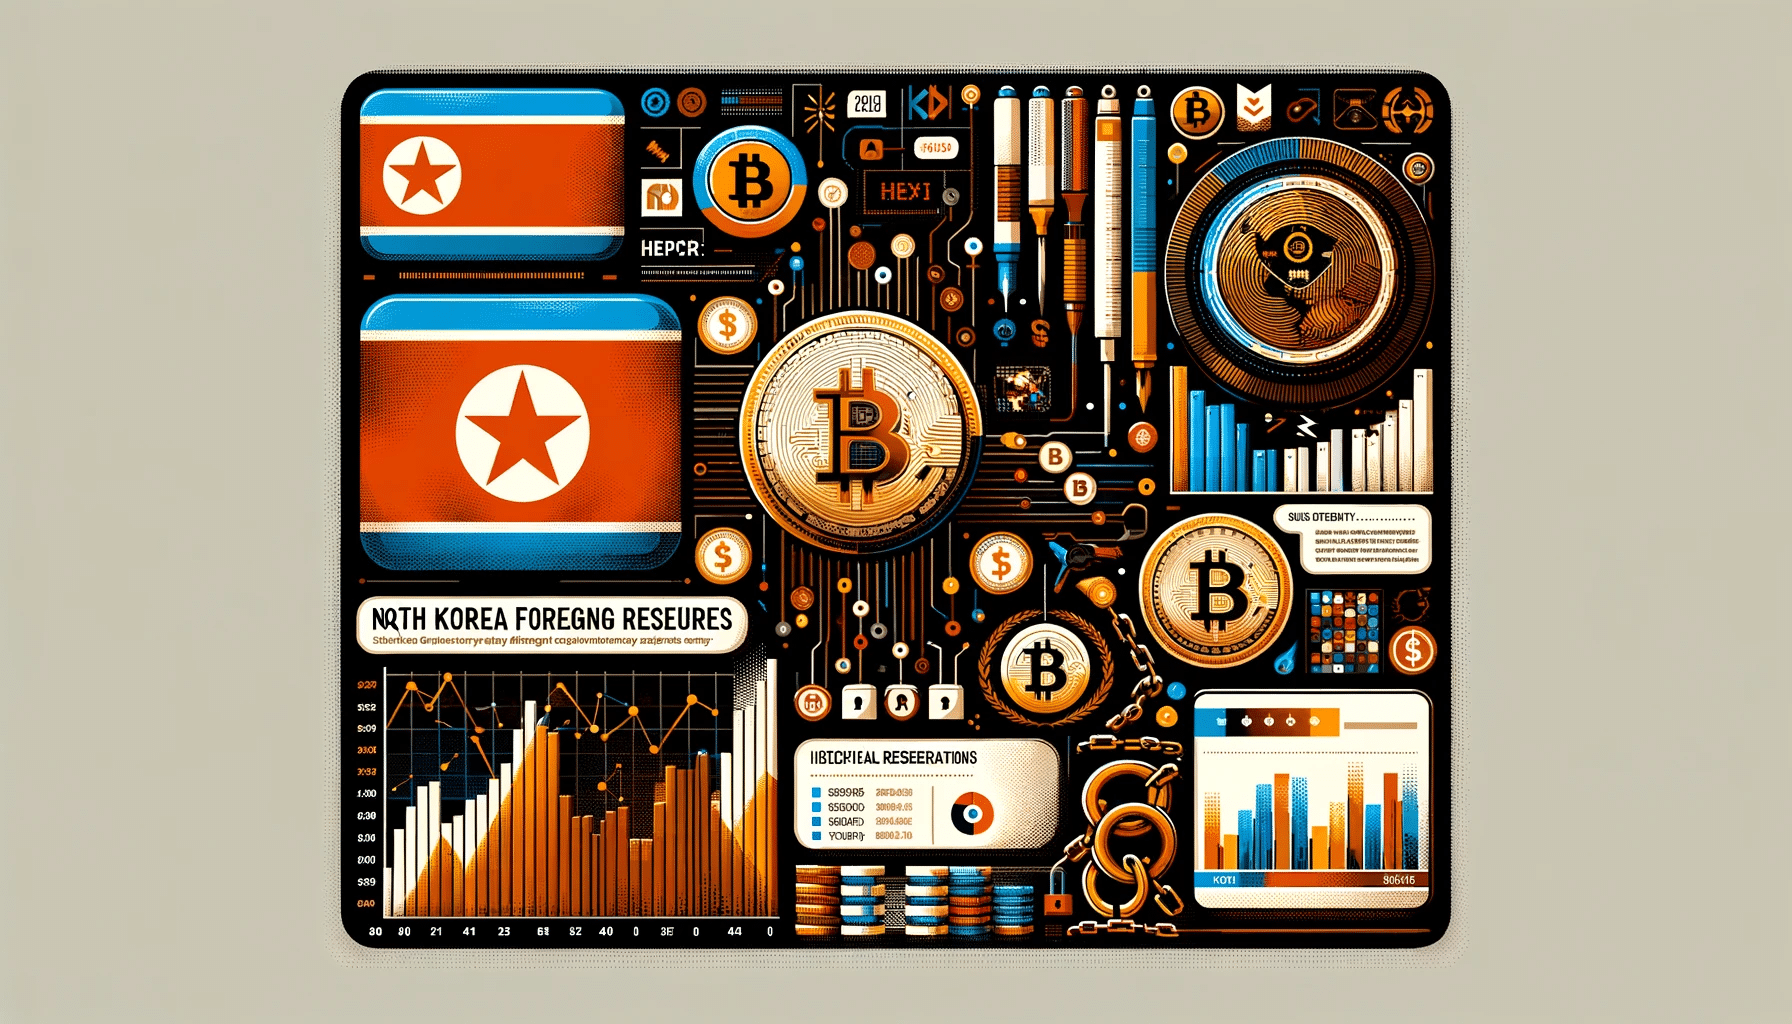 North Korea: Crypto-hacks fuel 50% of country’s foreign funds, claims report